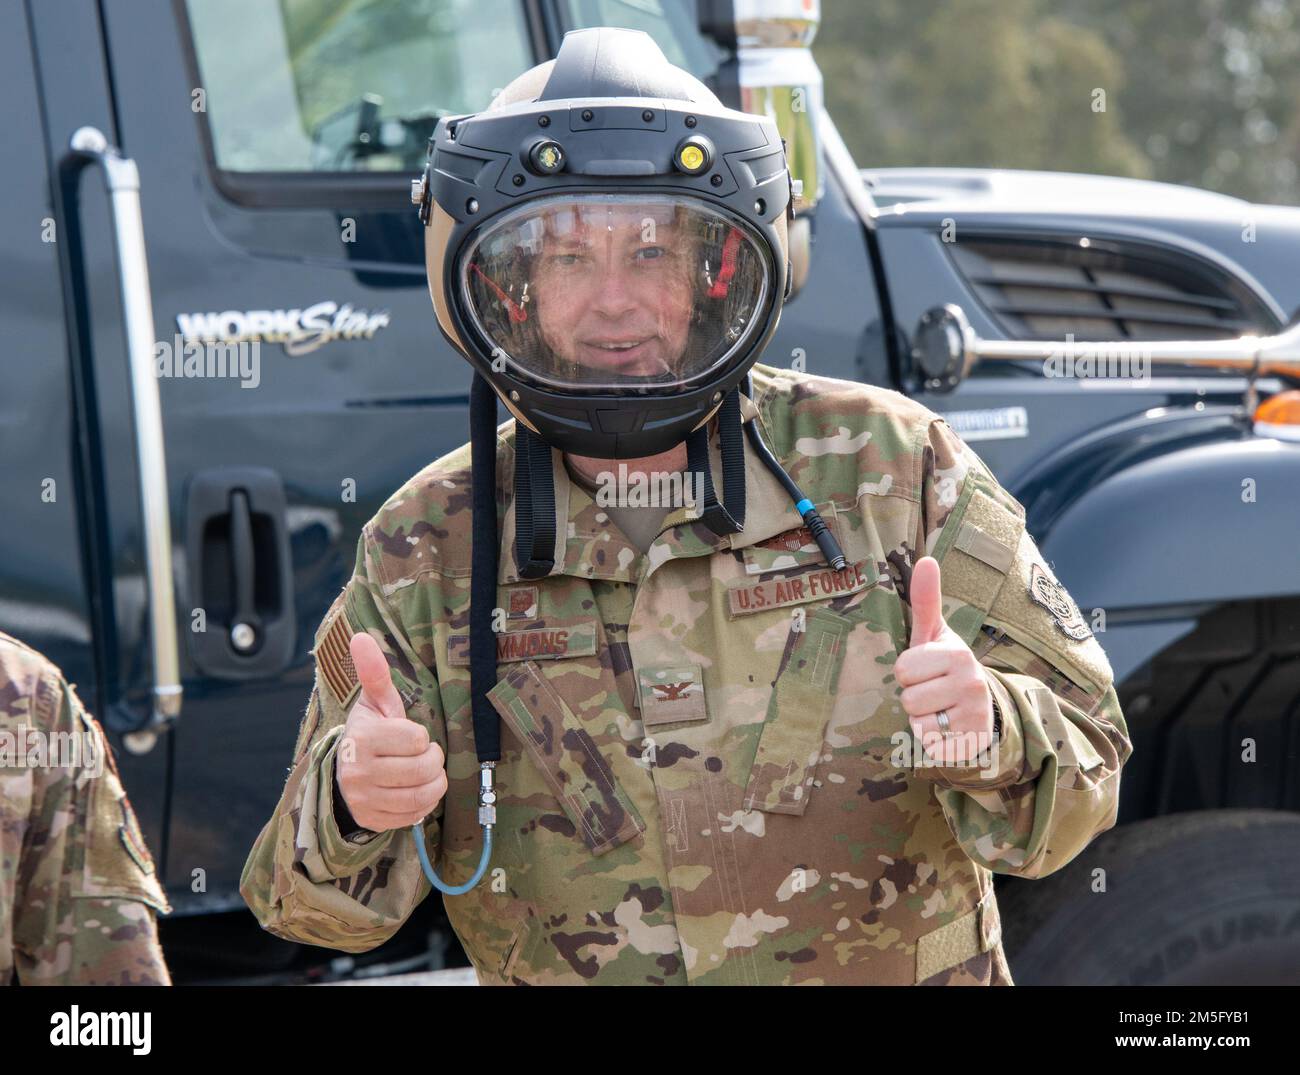 U.S. Air Force Col. Corey Simmons, 60th Air Mobility Wing commander, wears an Explosive Ordnance Disposal blast suit helmet during a visit to the EOD range at Travis Air Force Base, California, March 15, 2022. The helmet is designed to protect against the four main blast threats: overpressure, fragmentation, impact and heat. Trained to detect, disarm and dispose of explosive threats in extreme environments, EOD technicians serve as the Air Force’s bomb squad. Stock Photo